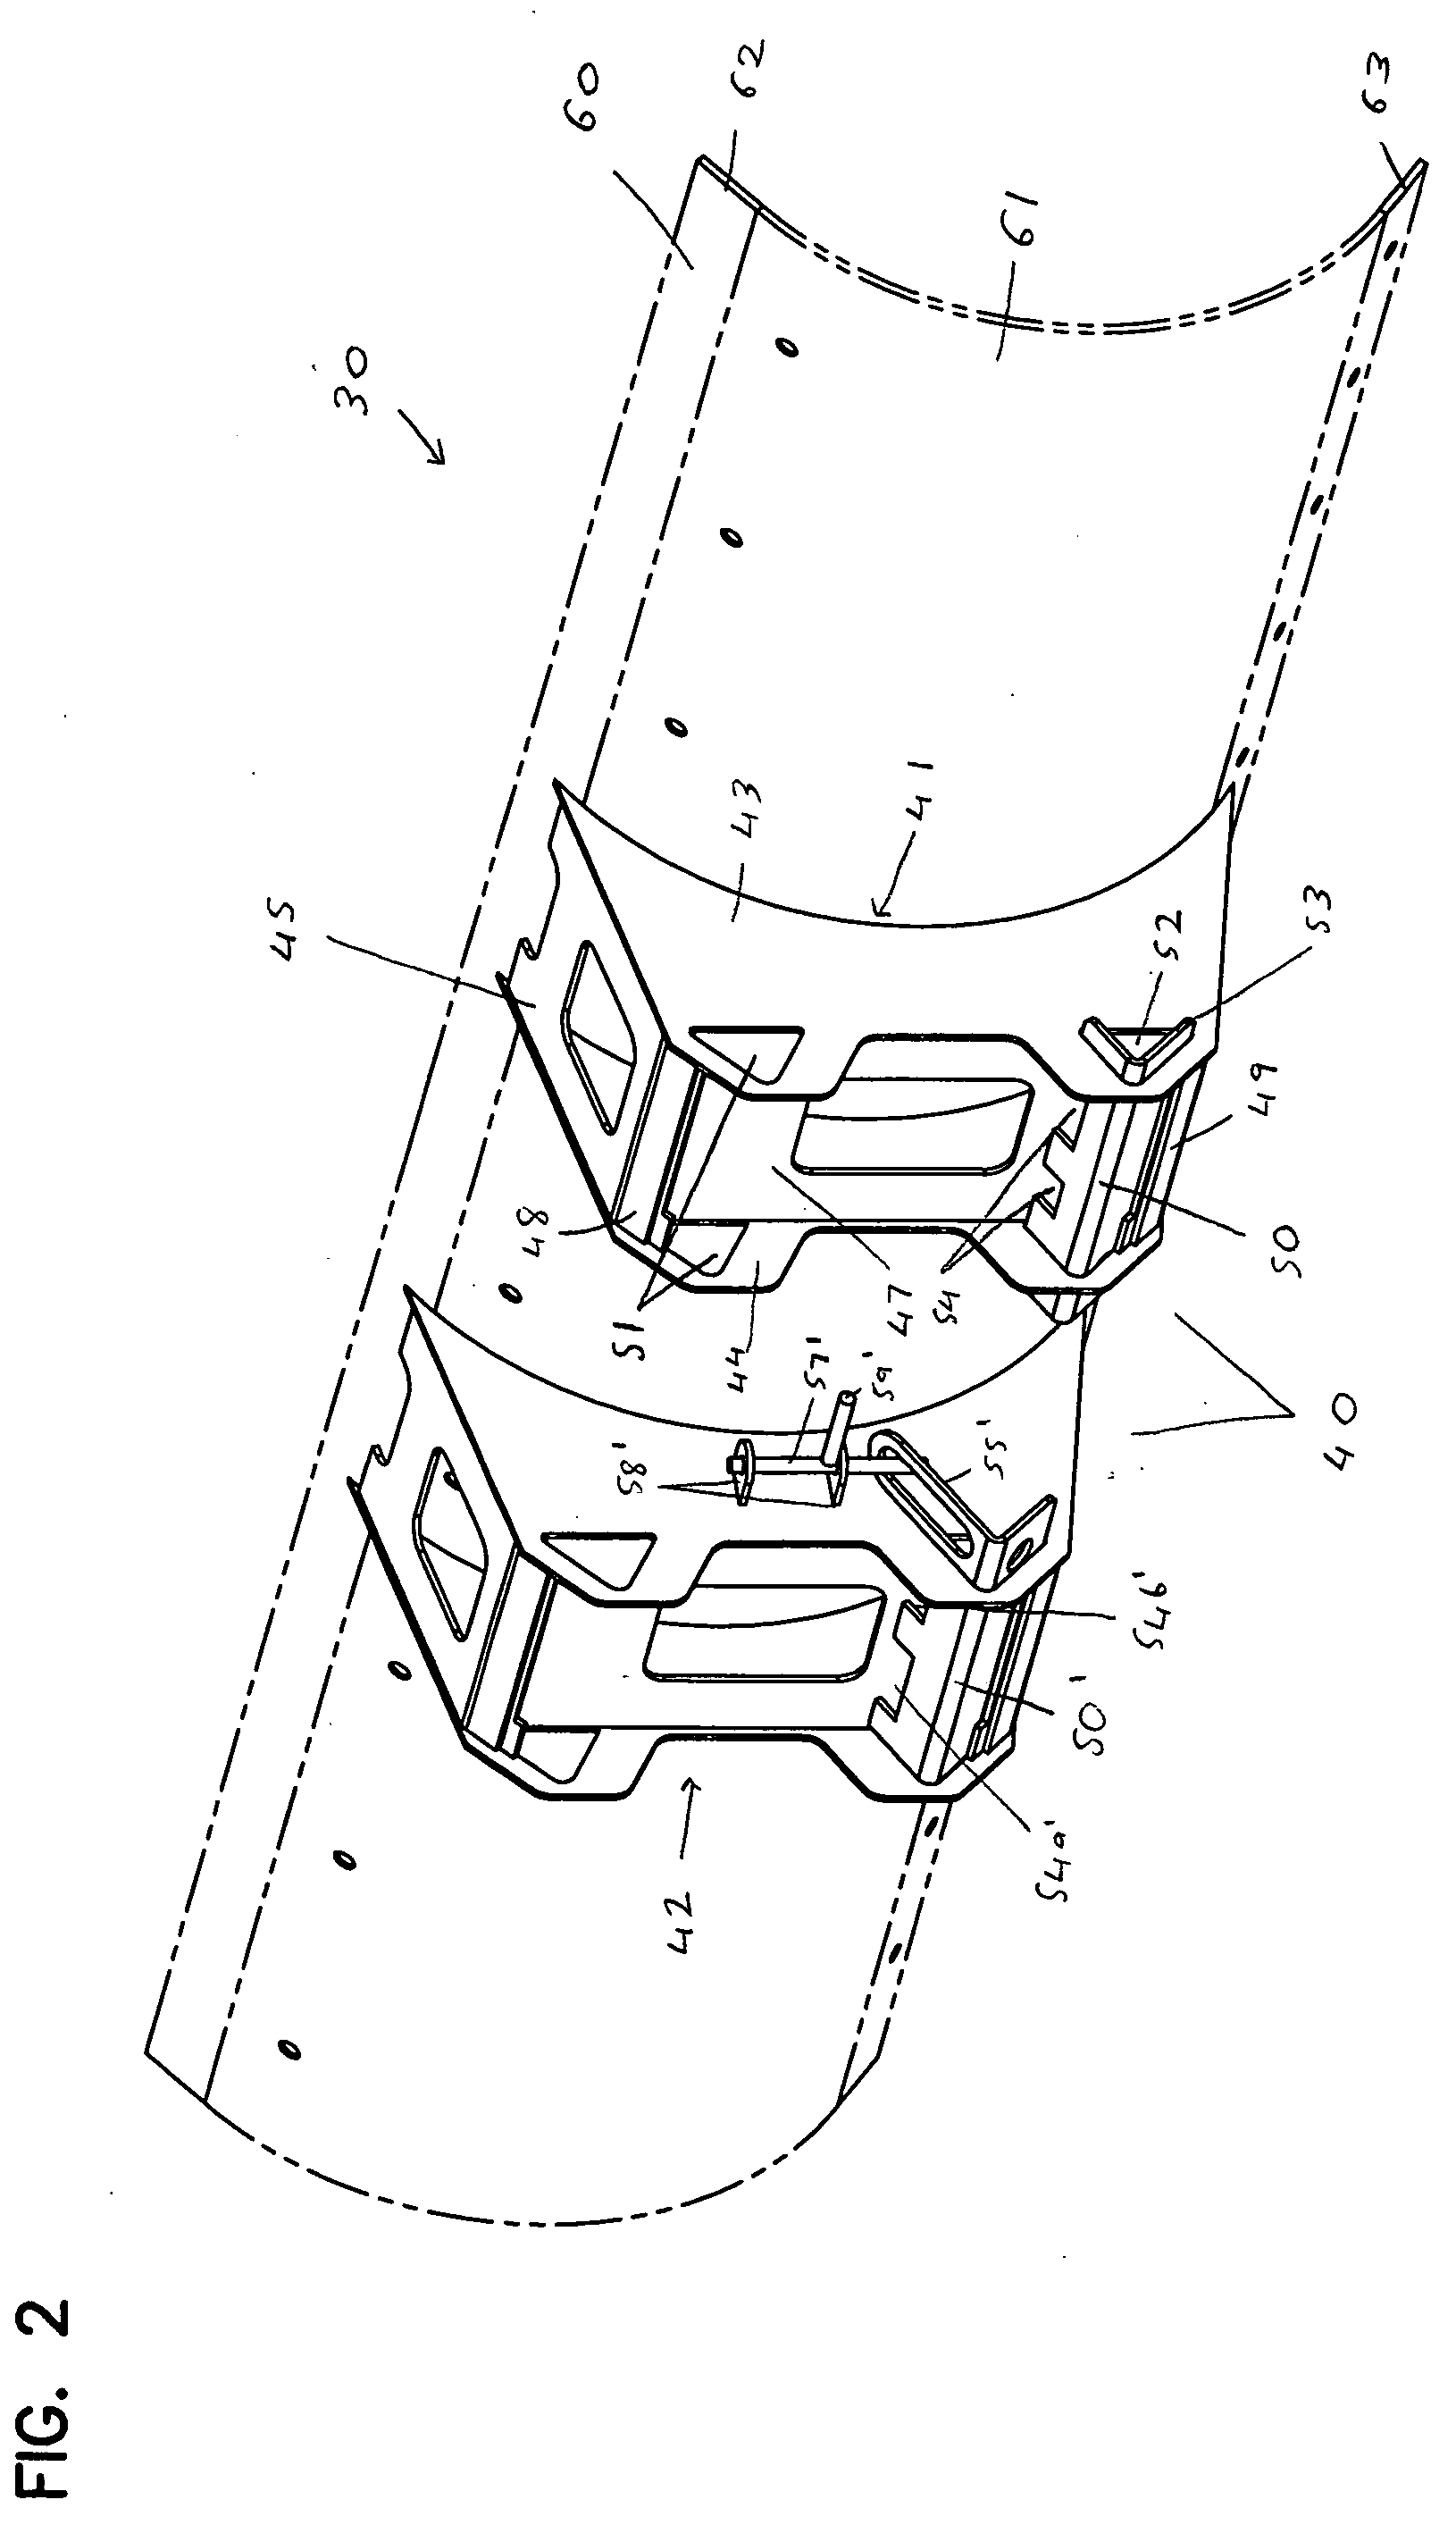 Reversible hitch structure for loader attachments